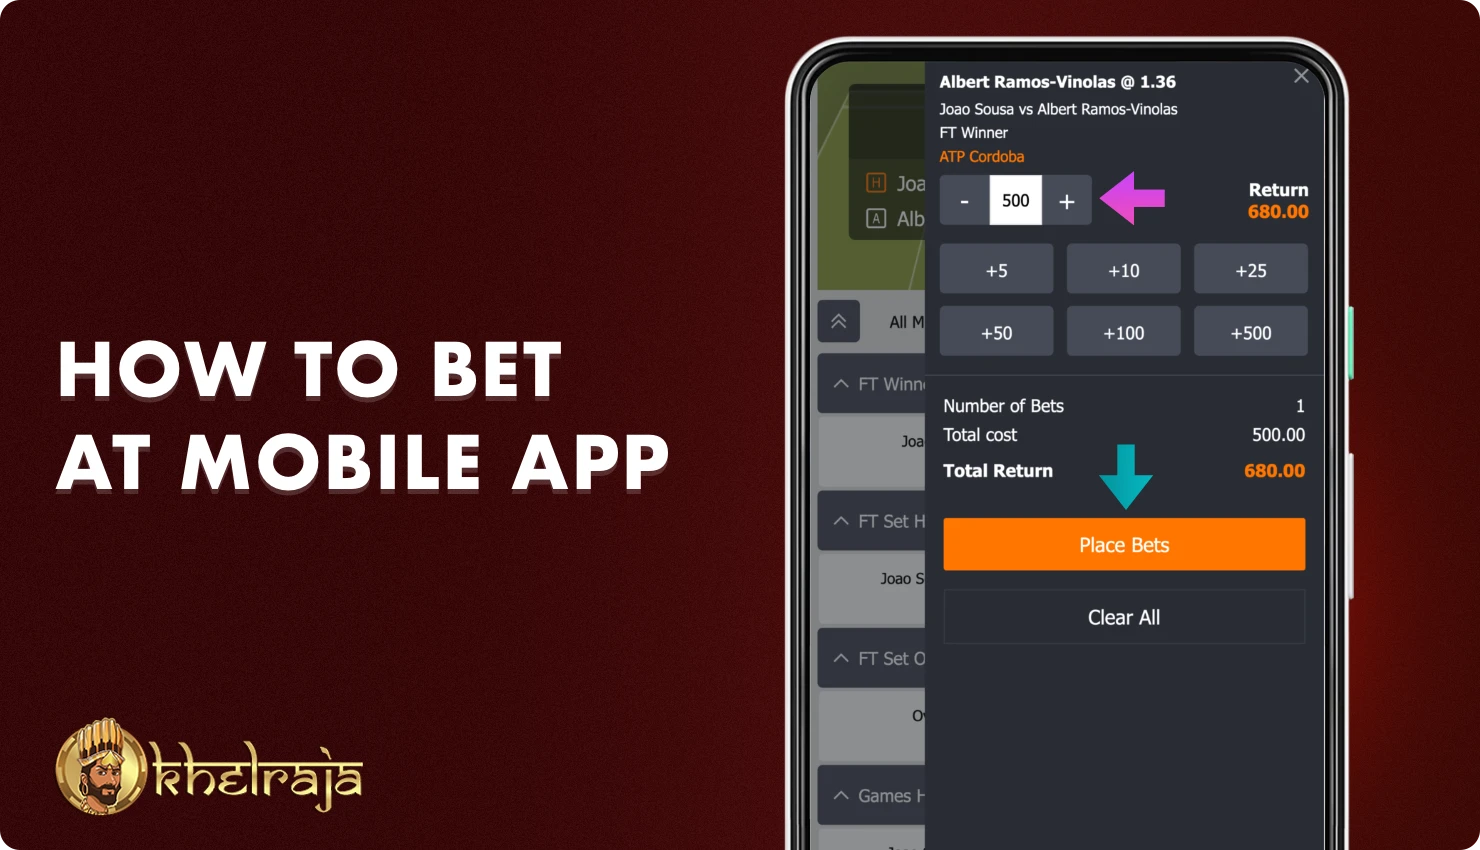 In order to place a bet on sports in the Khelraja app, an Indian user needs to follow a few simple steps